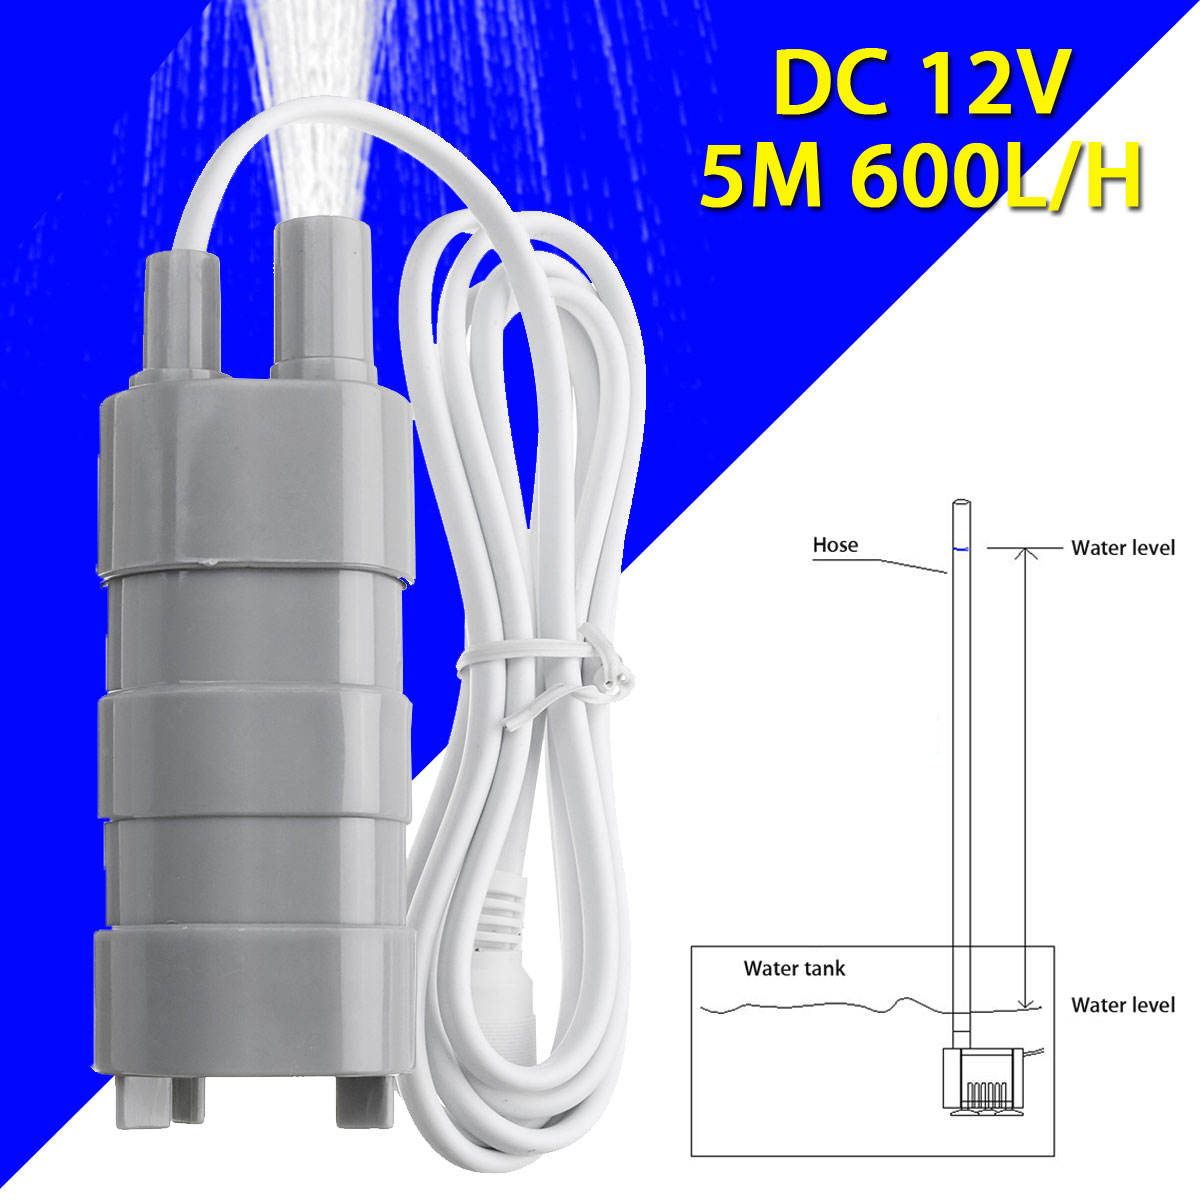 DC-12V-Pump-Solar-Brushless-Magnetic-Submersible-Water-Pump-5M-600LH-Fish-Pond-1302586-2